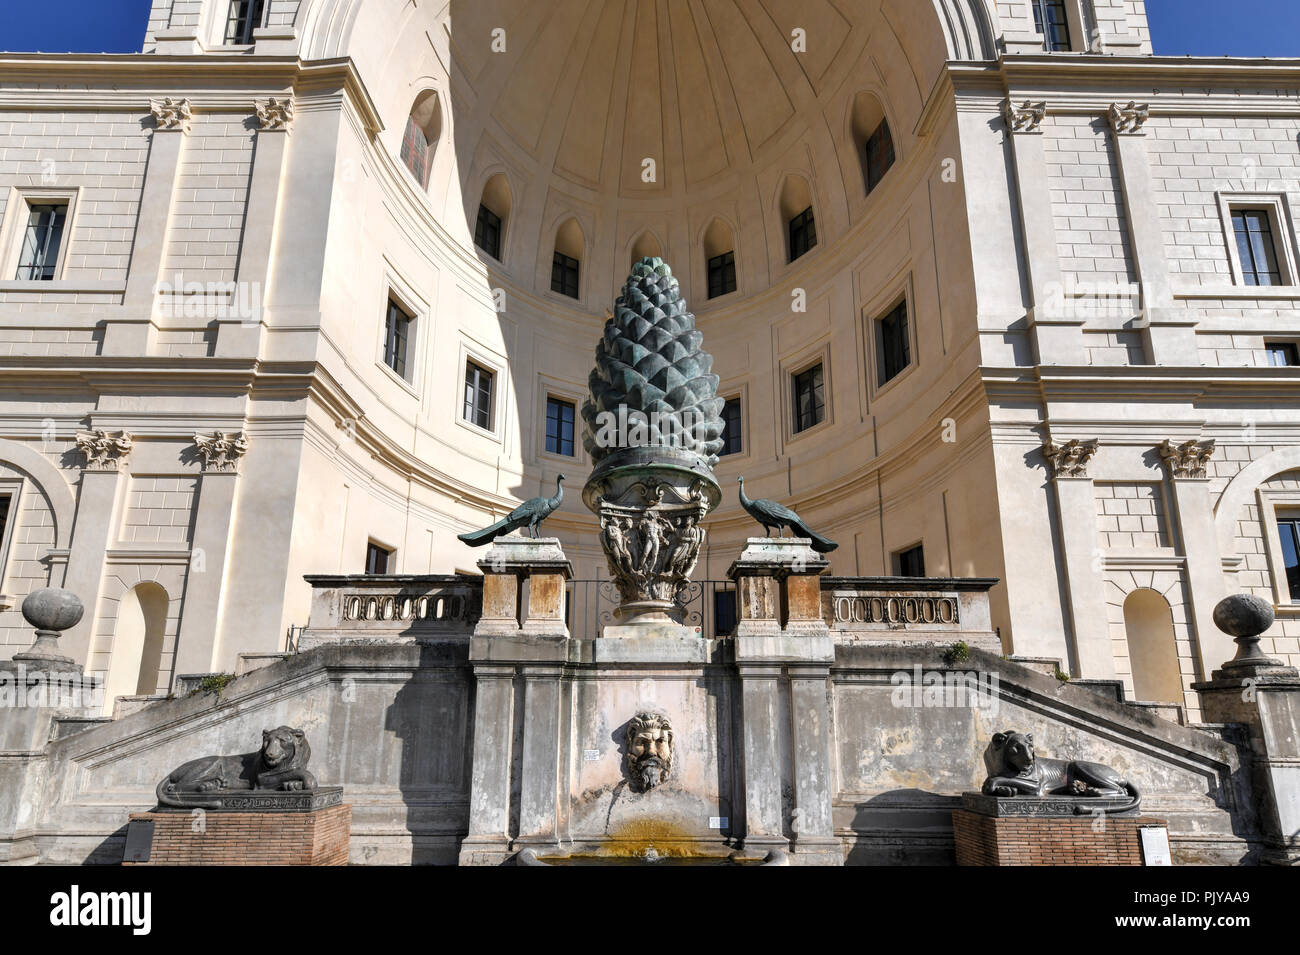 The Pigna fountain at St. Peter's in Rome - Pigna is the name of rione IX  of Rome. The name means pine cone in Italian, and the symbol for the rione  is